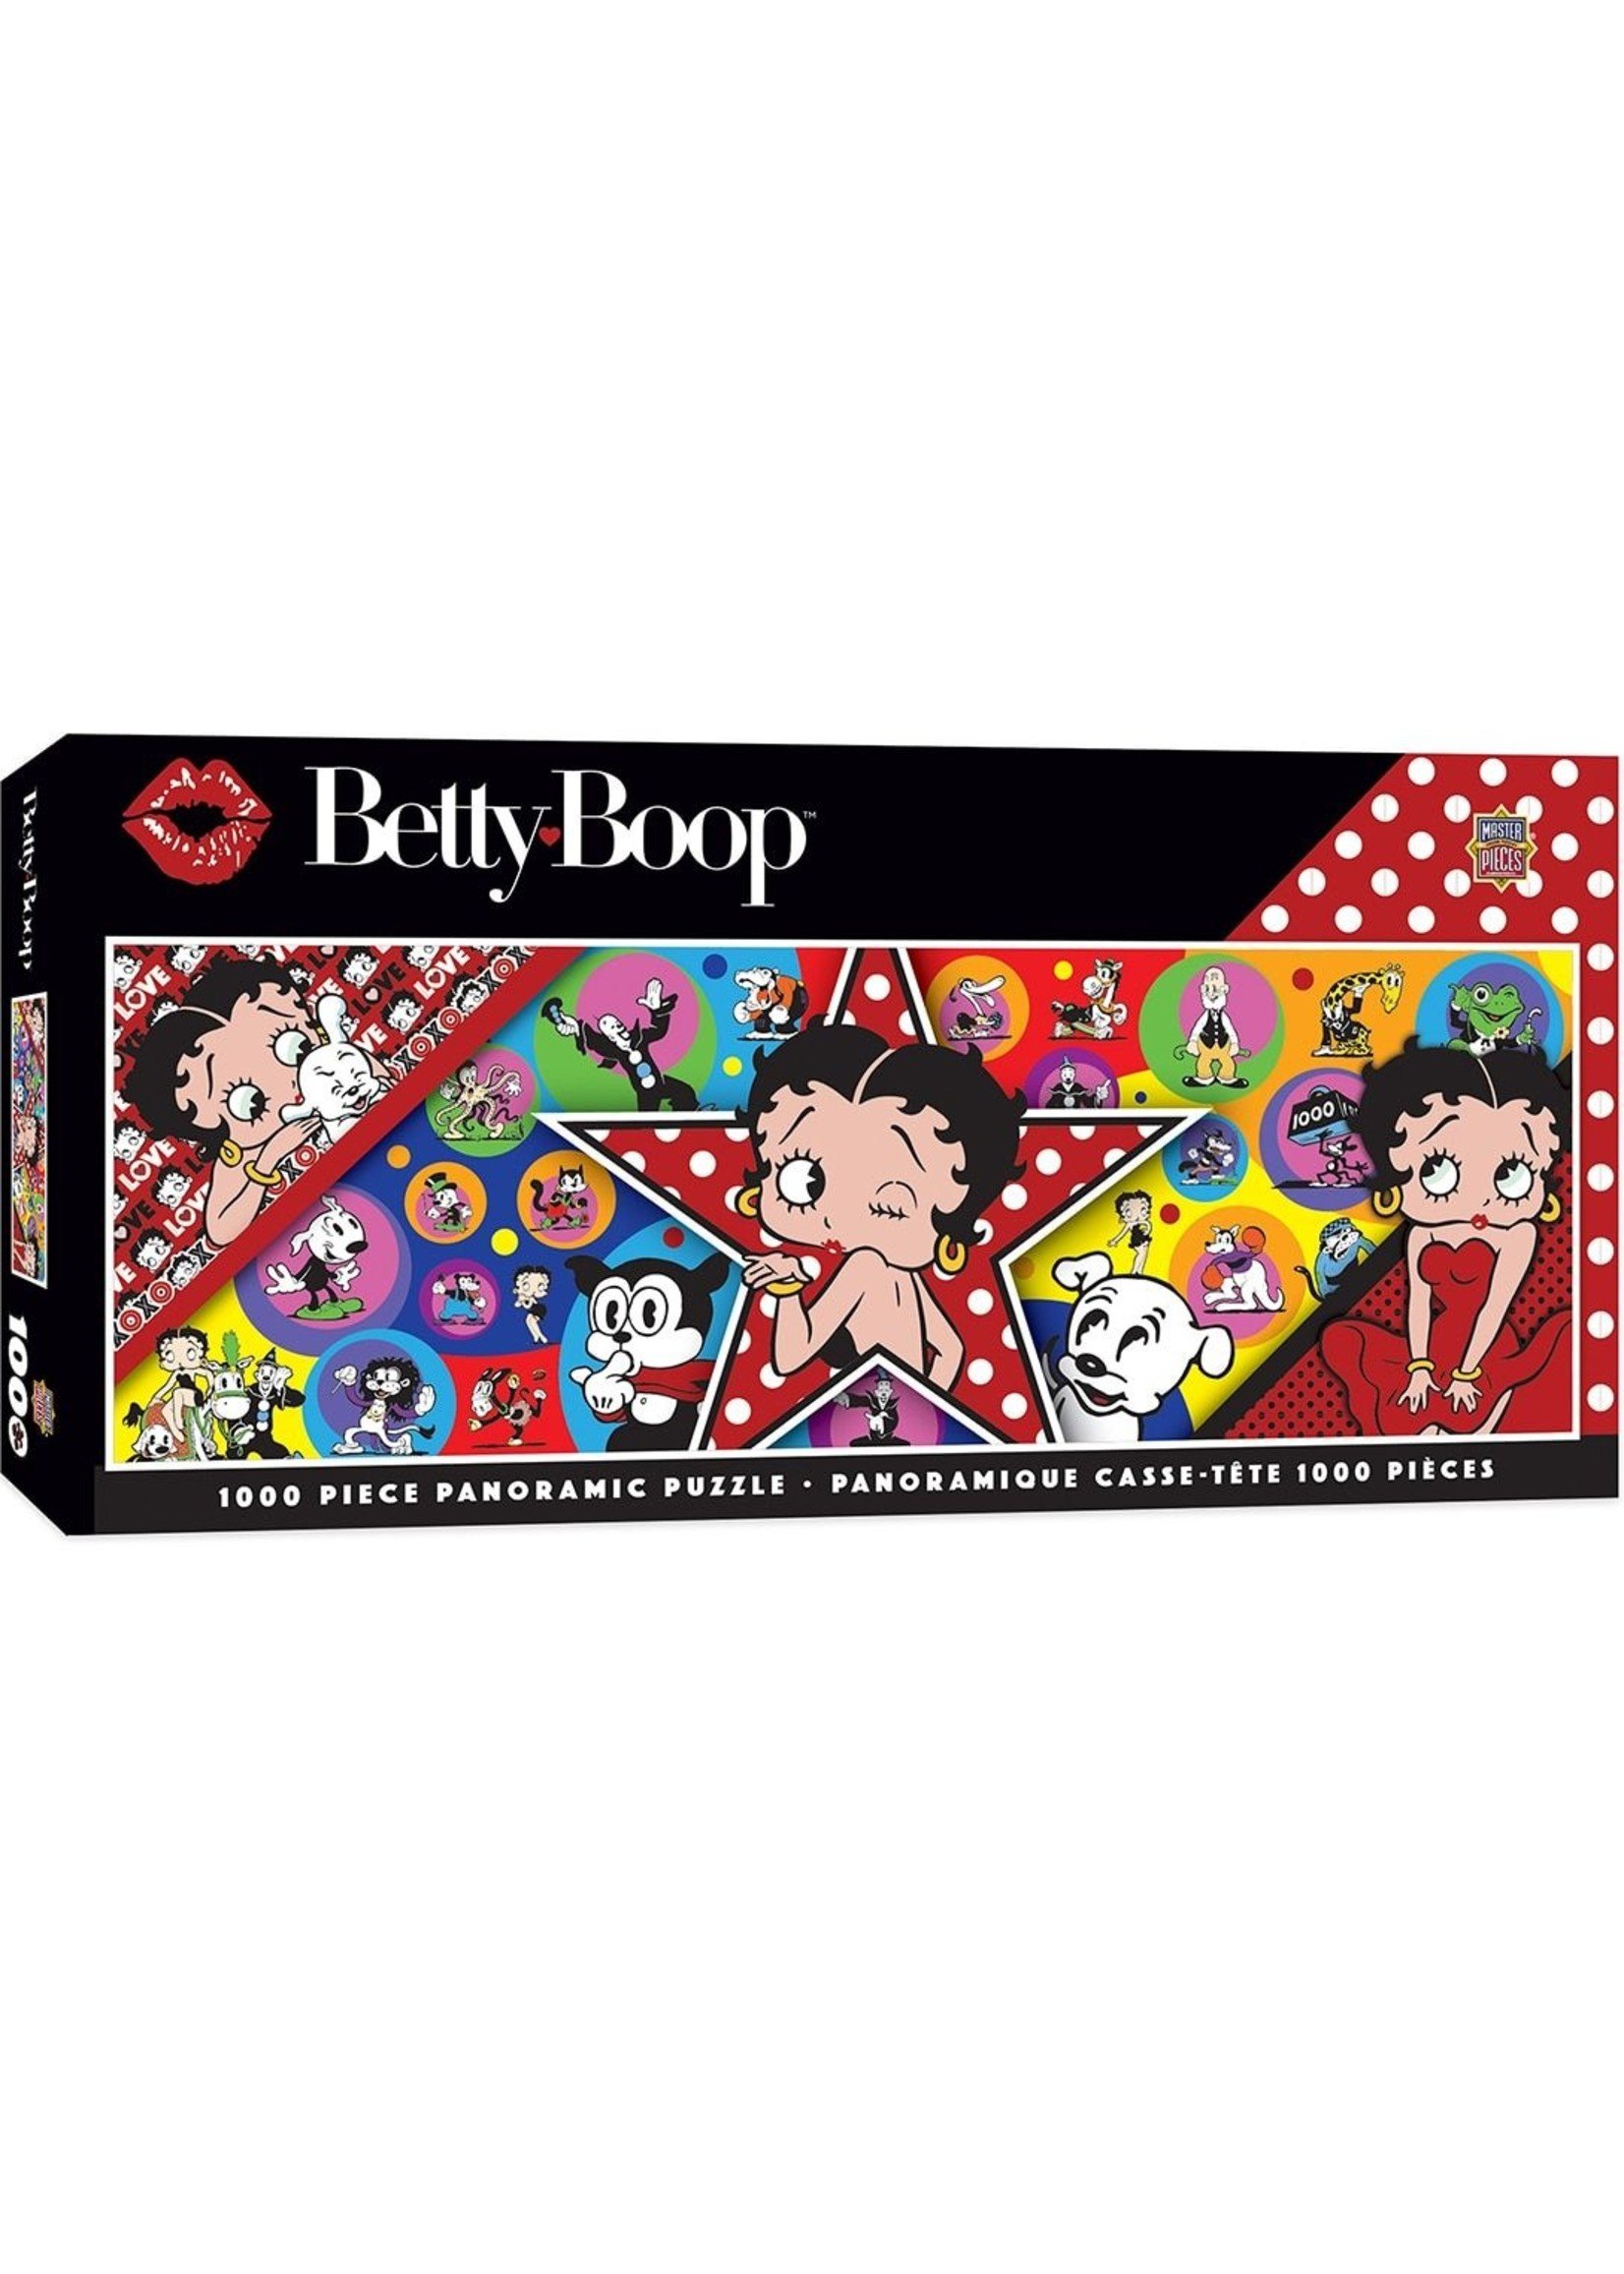 Betty Boop 1000 piece panoramic puzzle